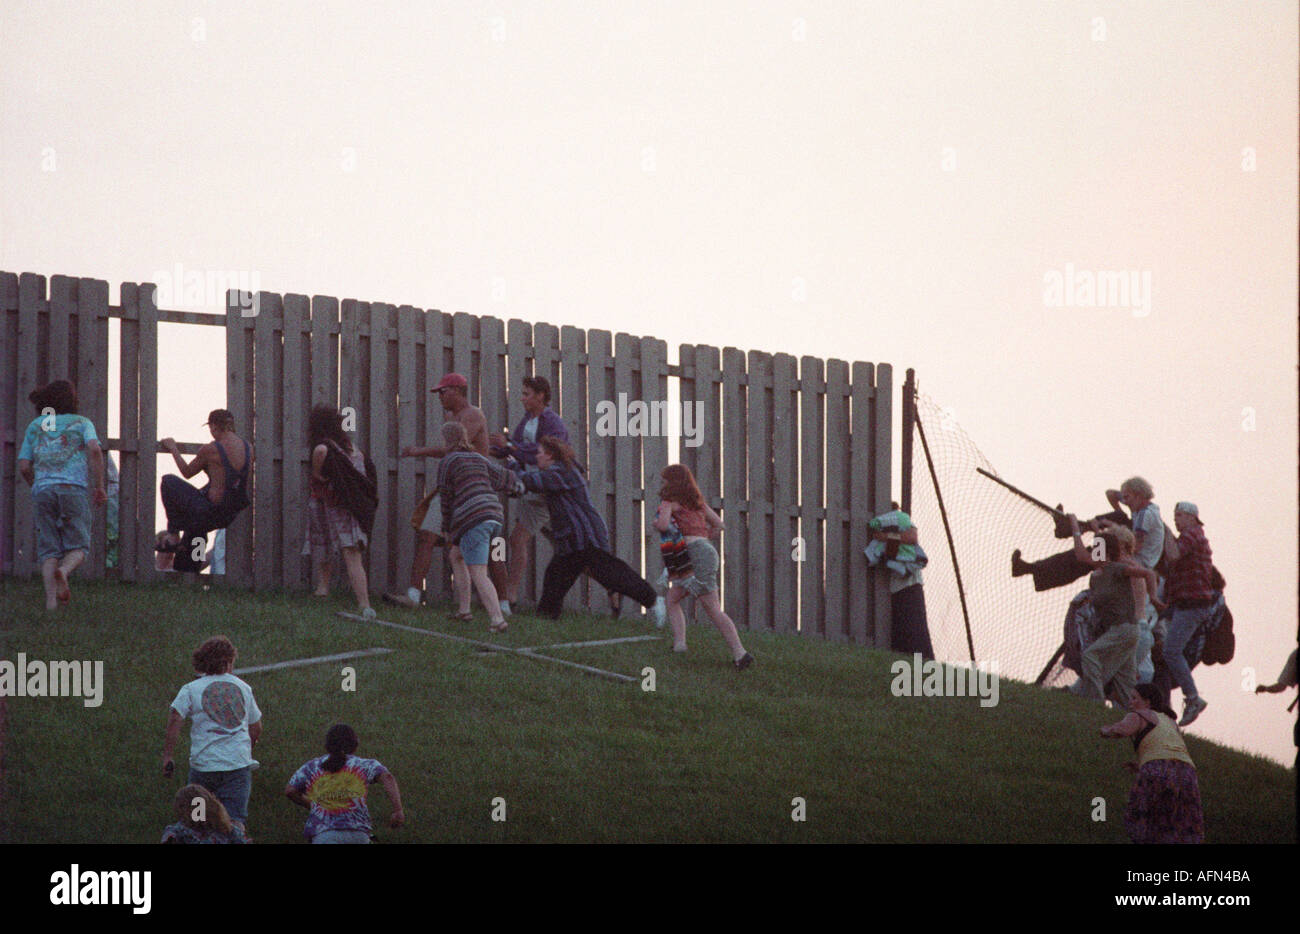 Rioting deadheads jump a fence to enter a Grateful Dead show at Deercreek Indiana during July 1995 Stock Photo